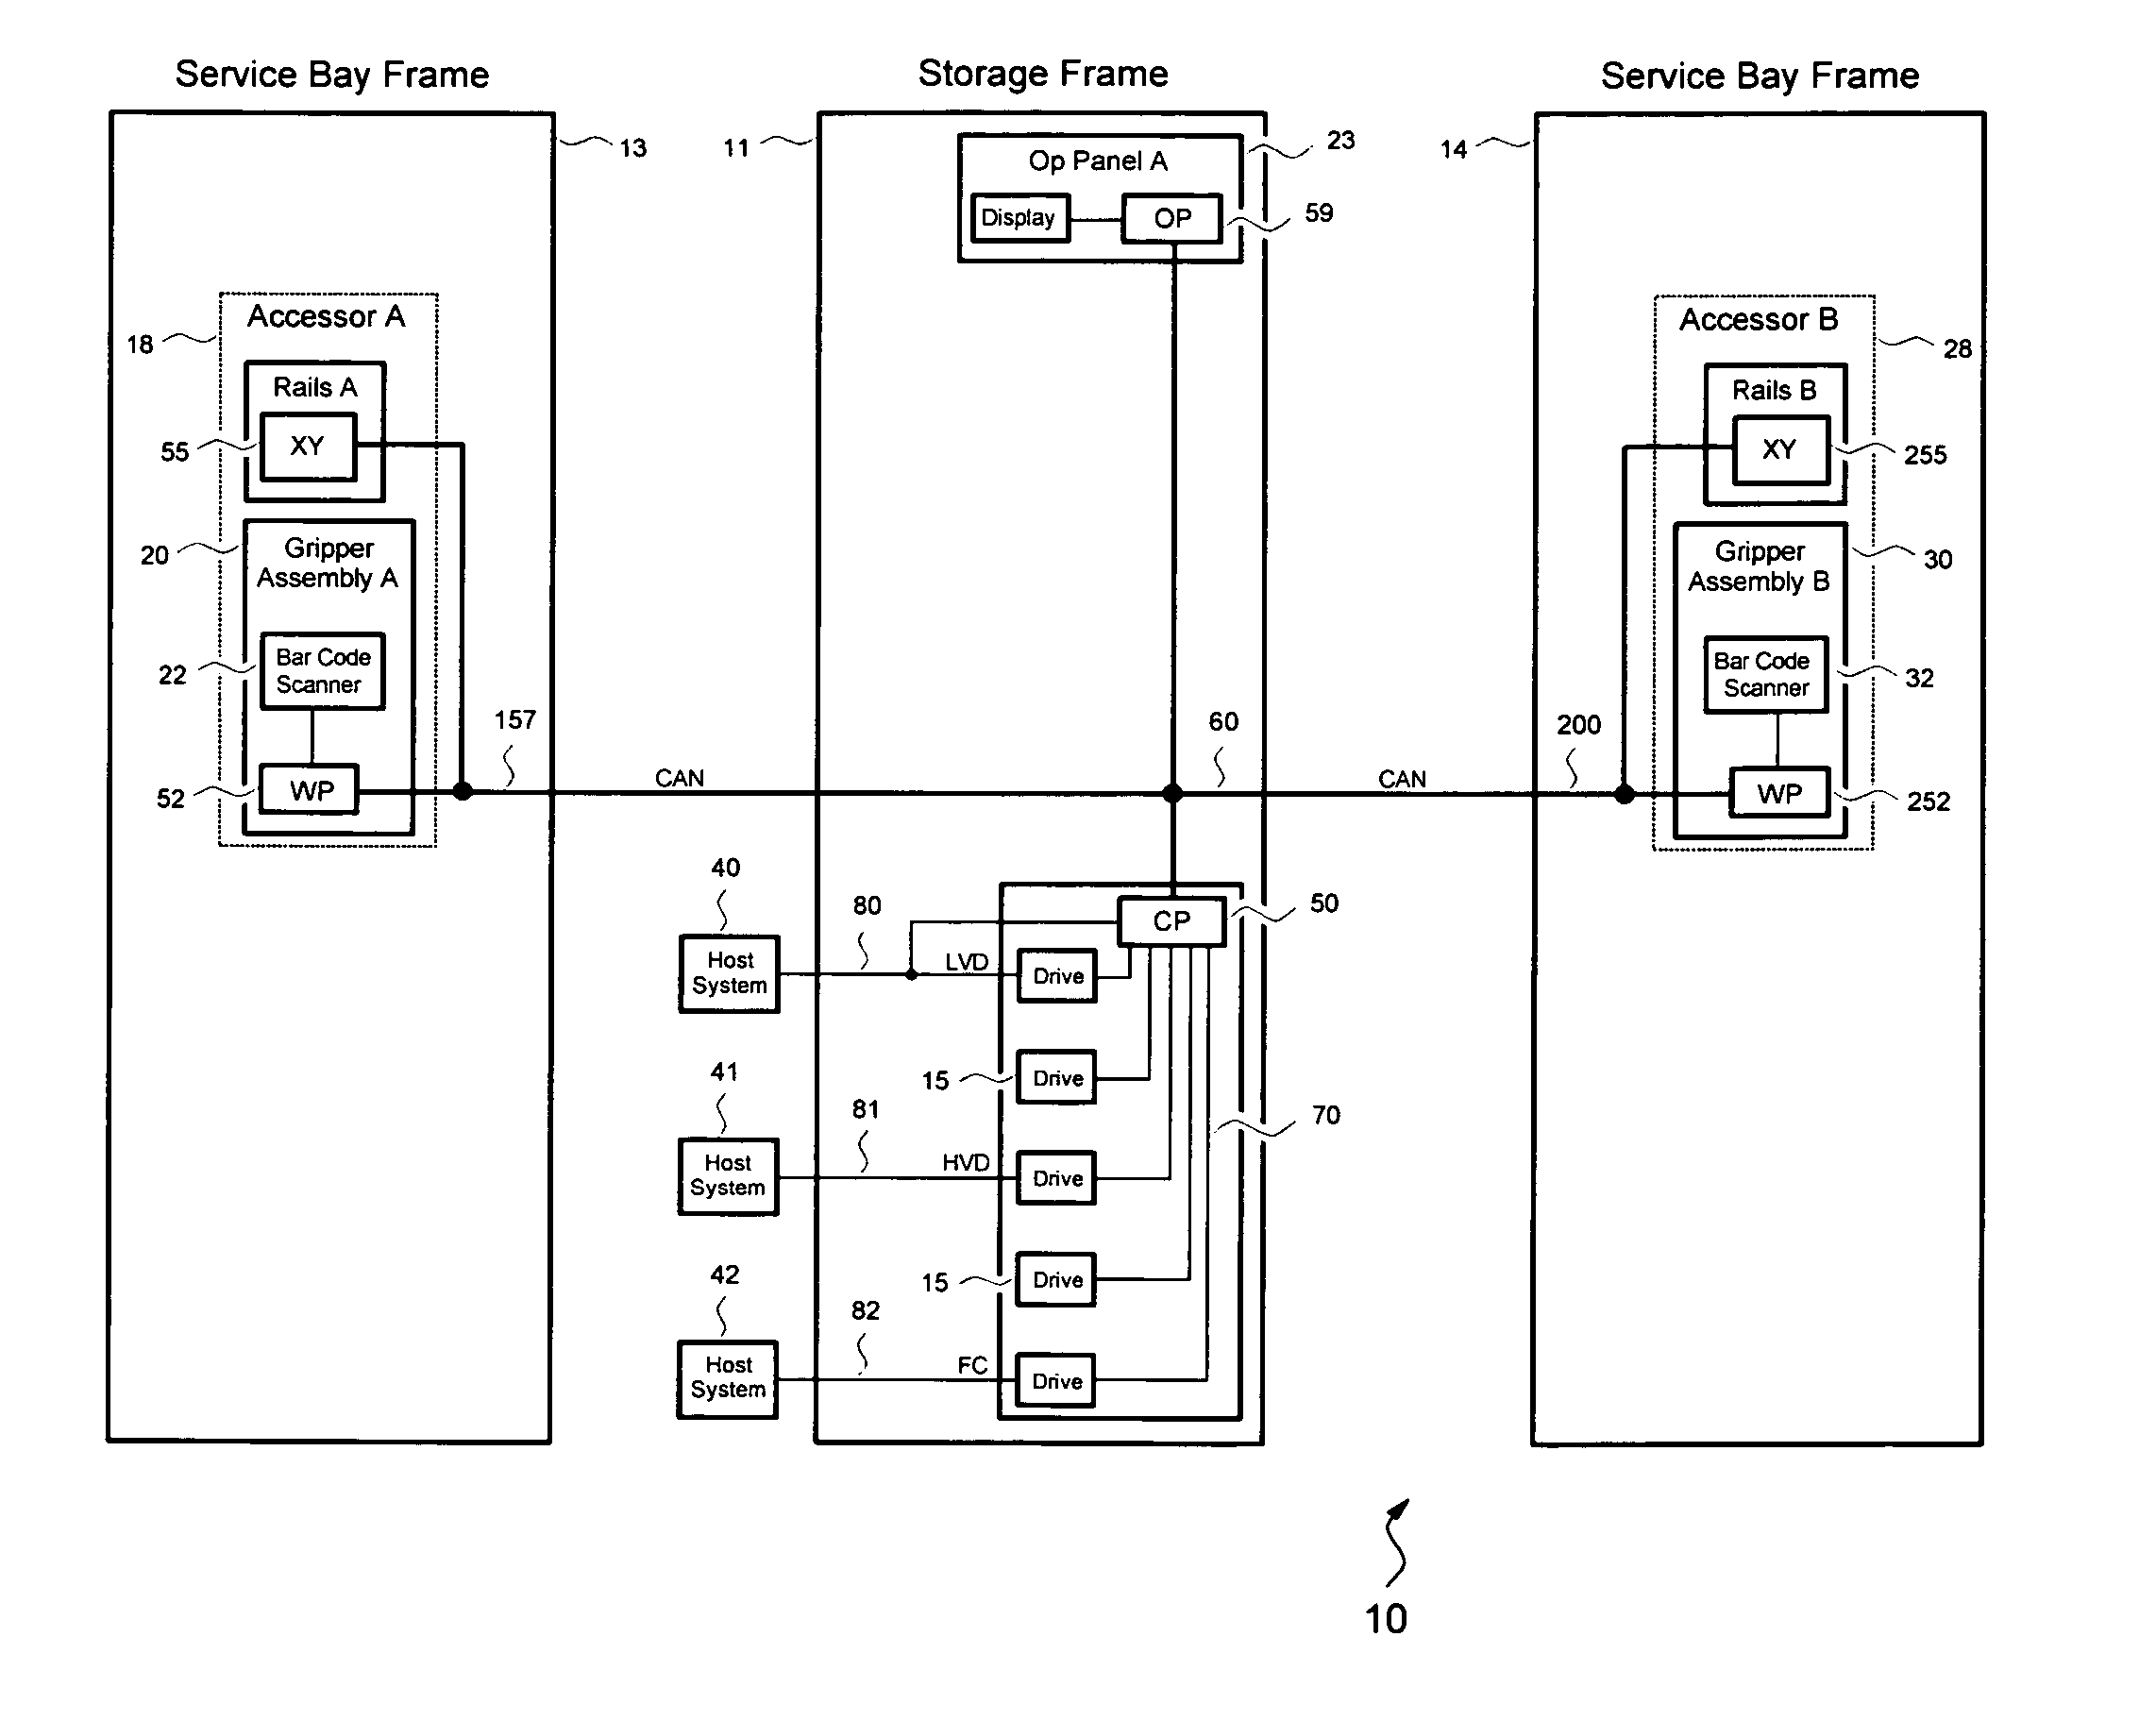 Management of data cartridges in multiple-cartridge cells in an automated data storage library